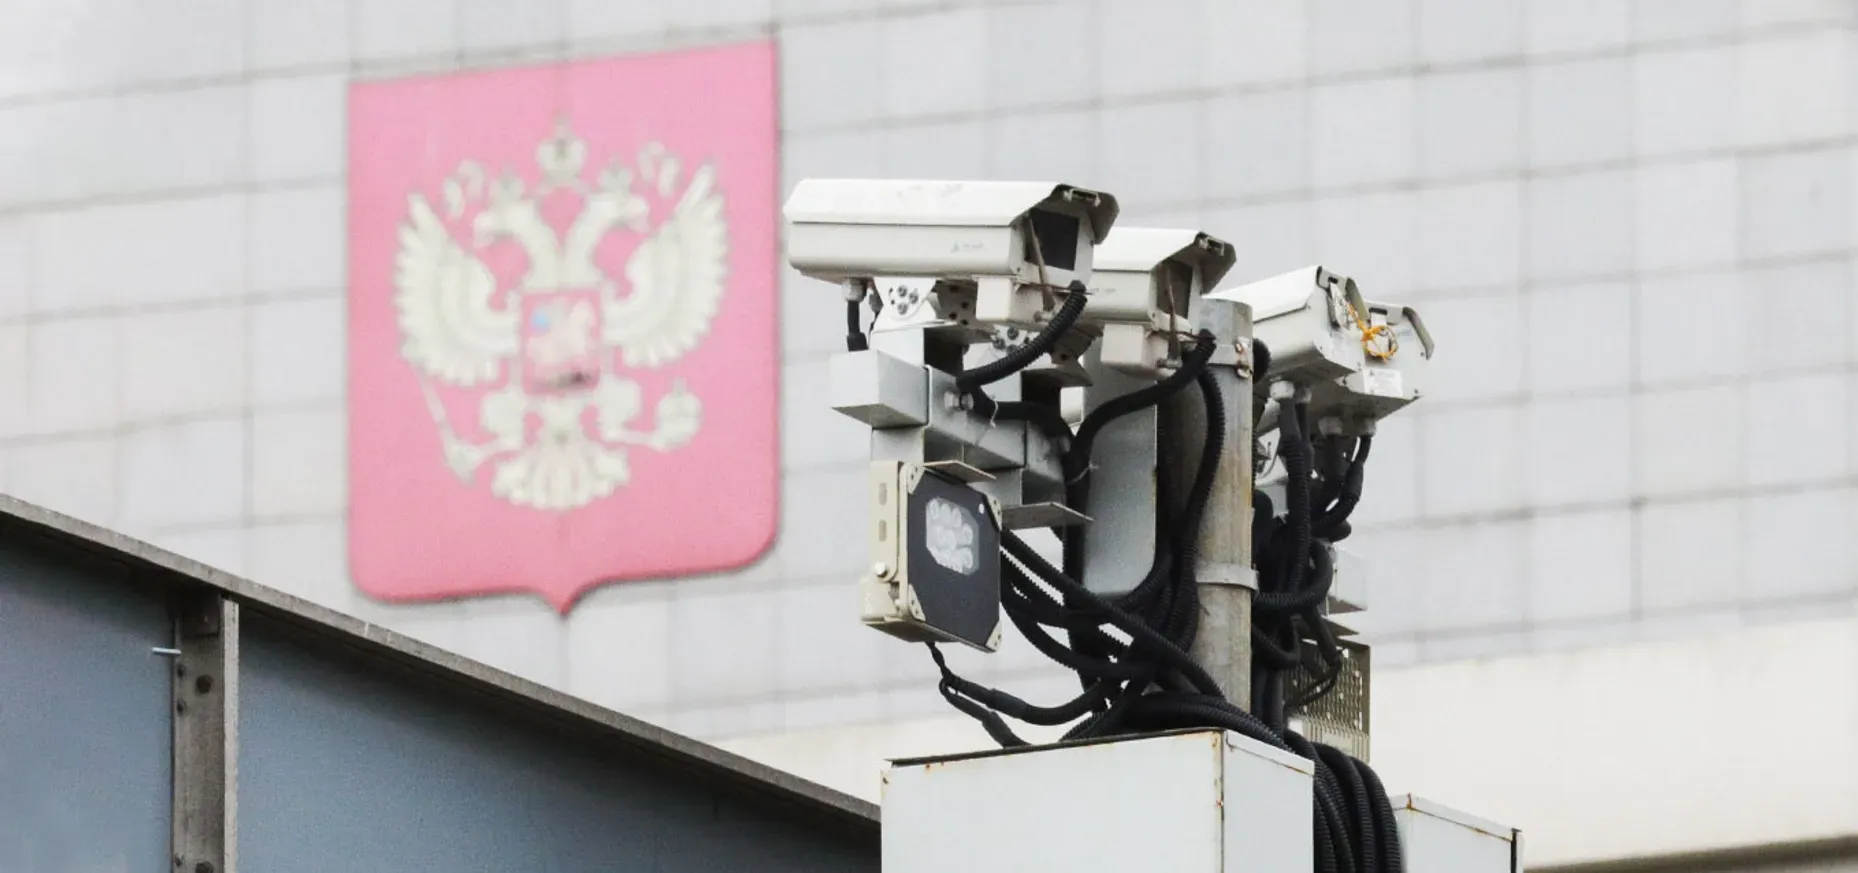 Russian authorities forced to save money on video surveillance